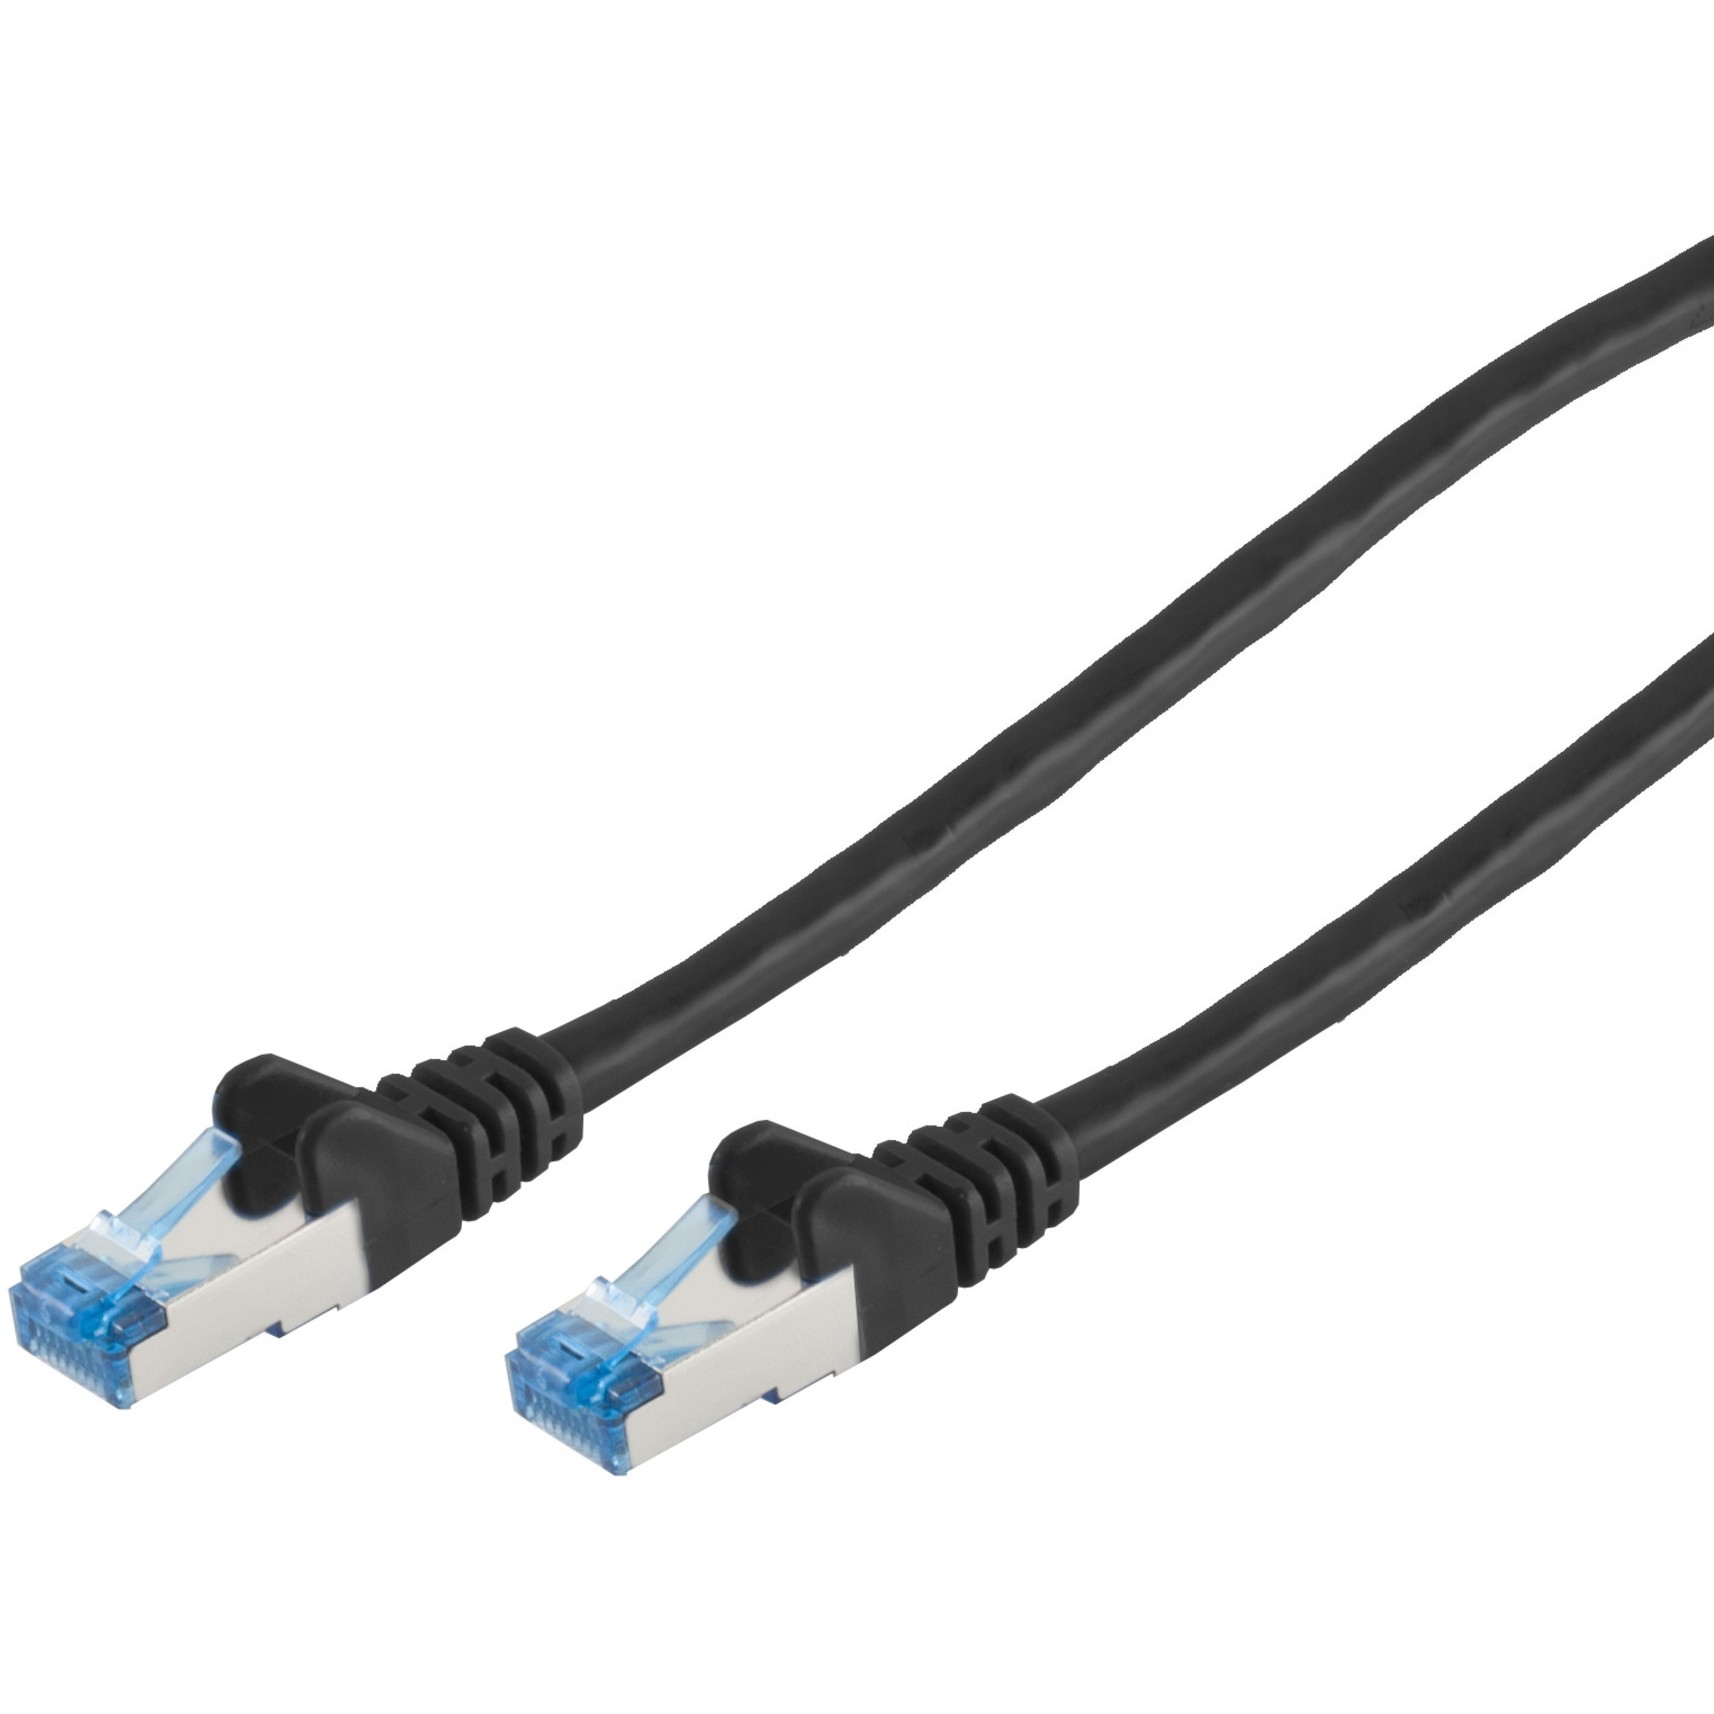 S-Conn 75713-S networking cable